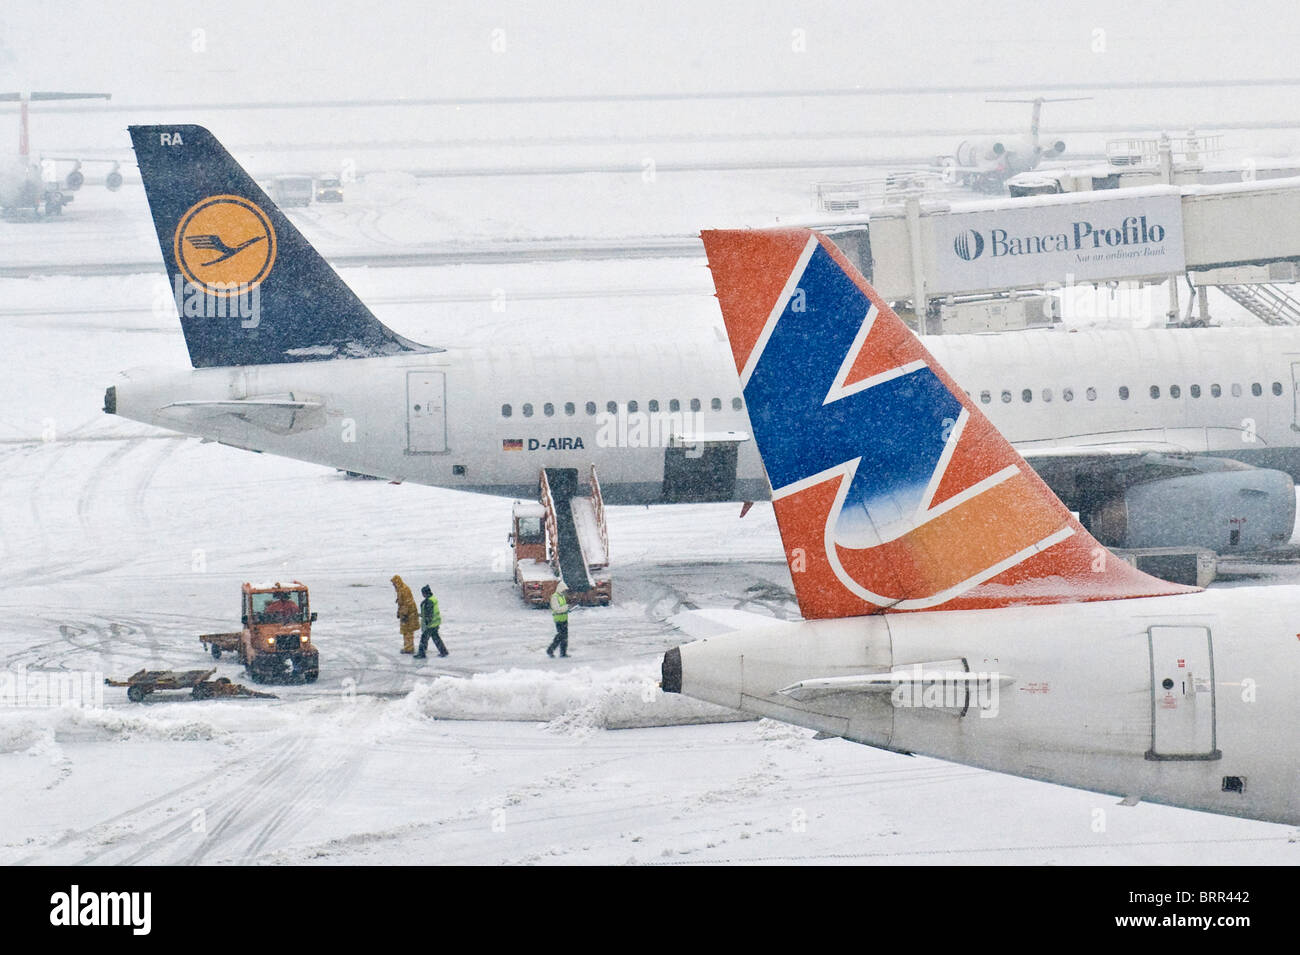 Airport and aeroplane covered in snow Stock Photo